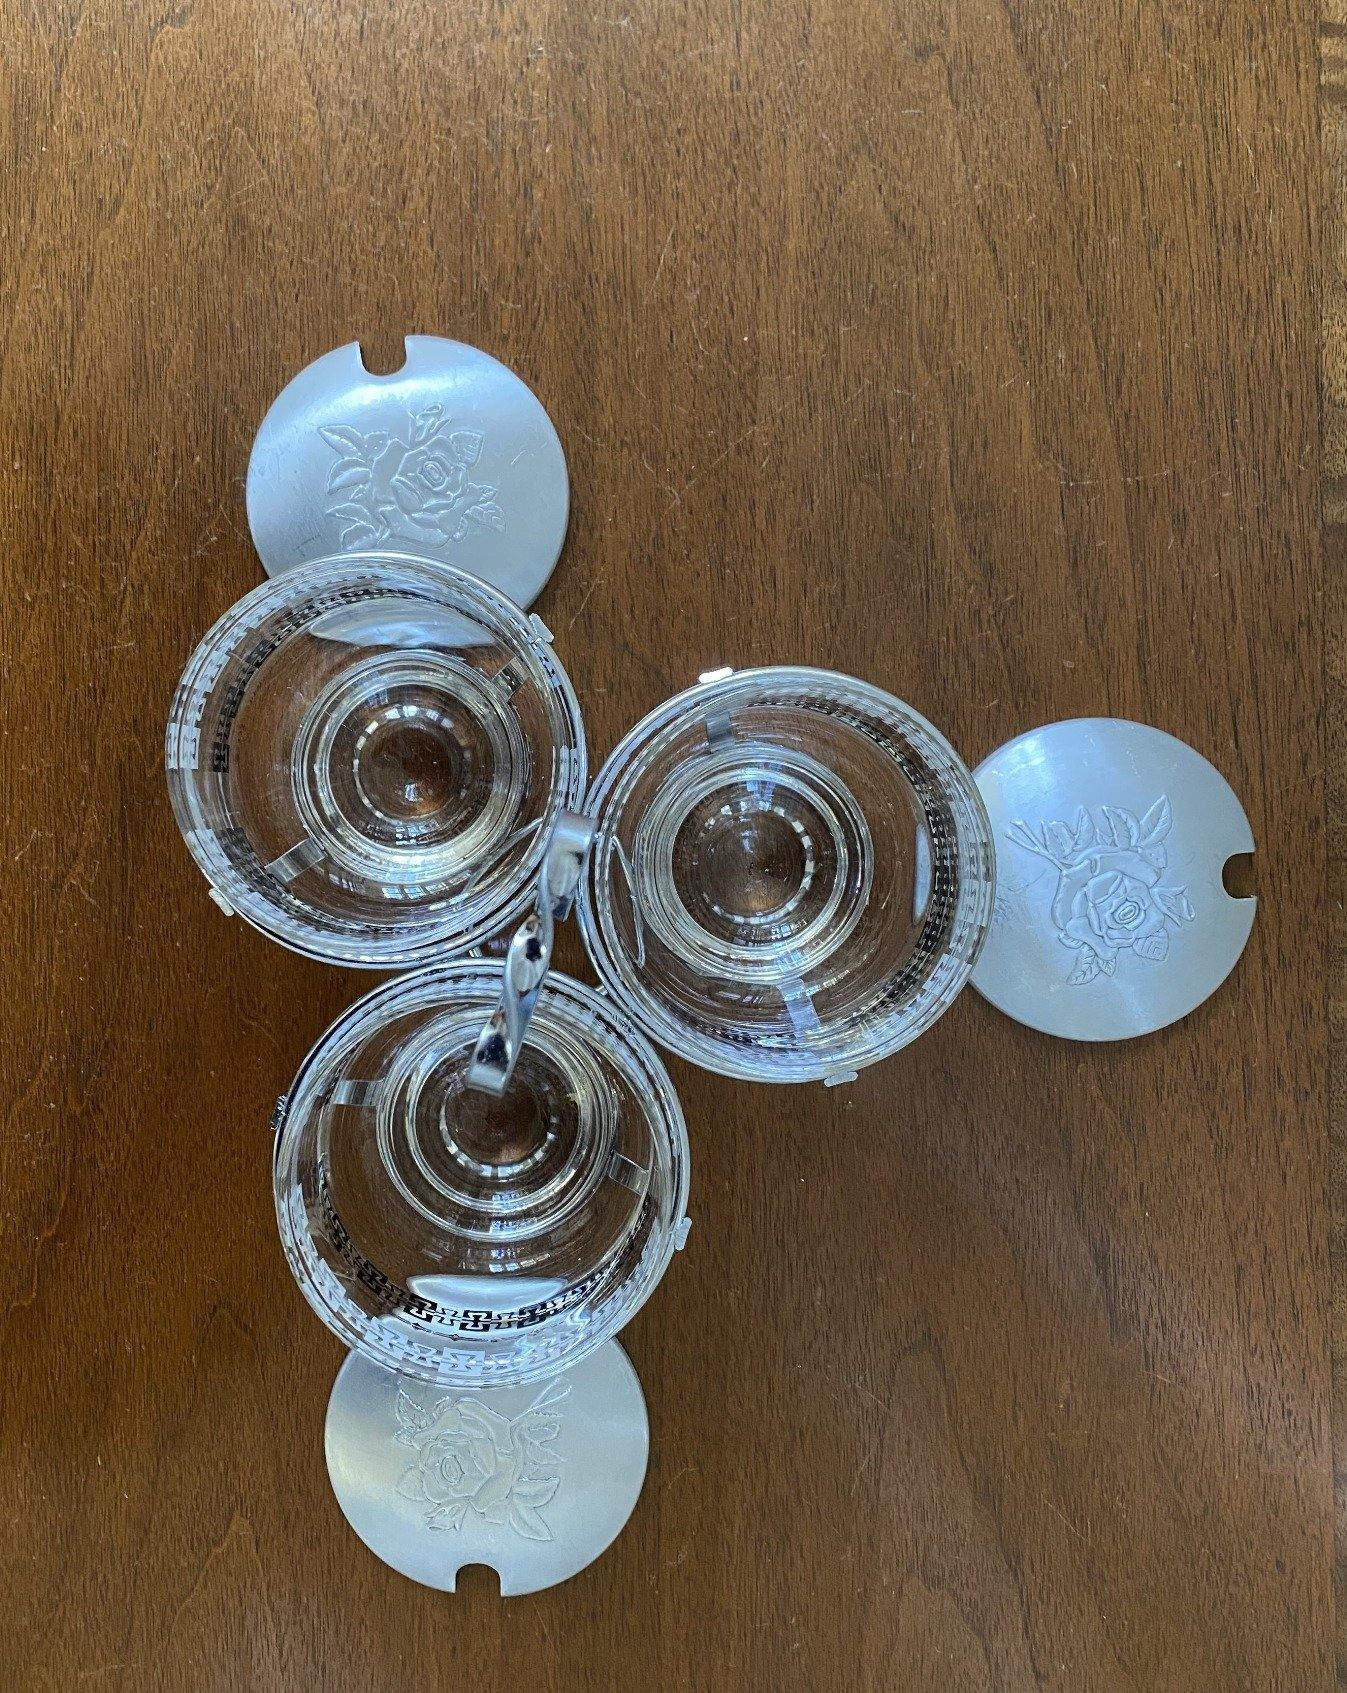 Birds eye view of glass condiment set with lids on table- Cook Street Vintage